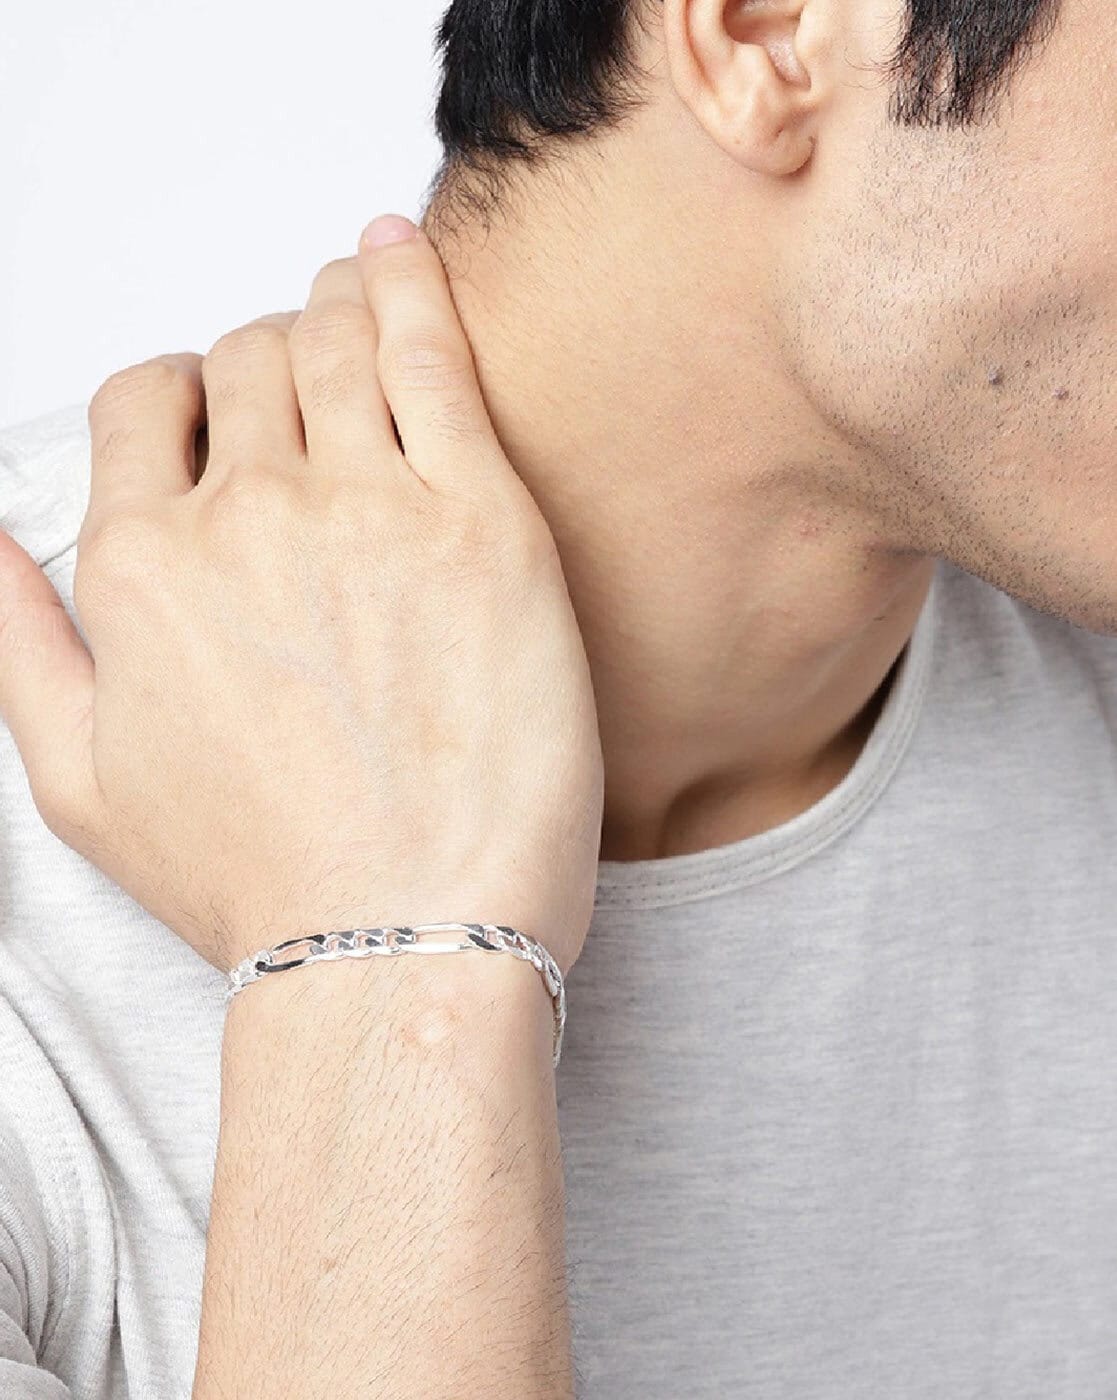 Men's Bracelets - The Complete Style Guide just in time for father's day